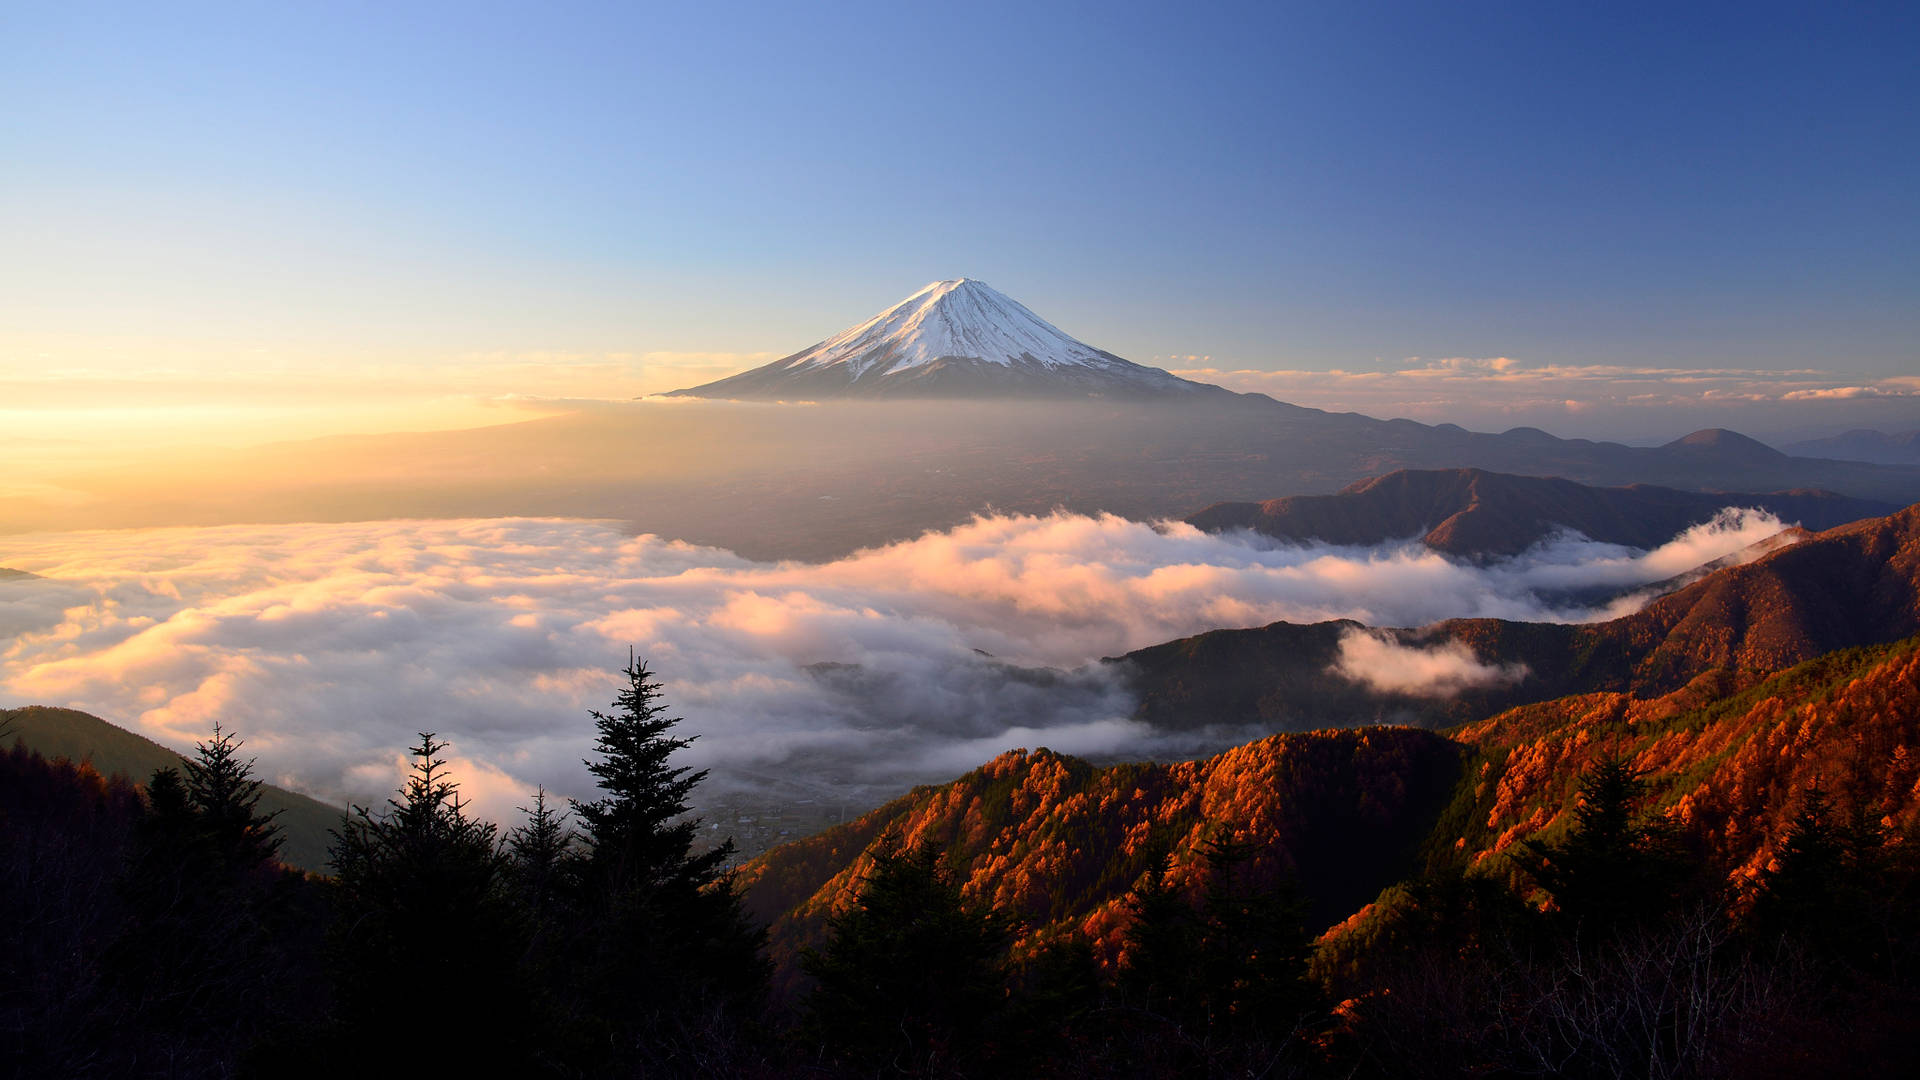 Above The Clouds Mount Fuji Wallpaper